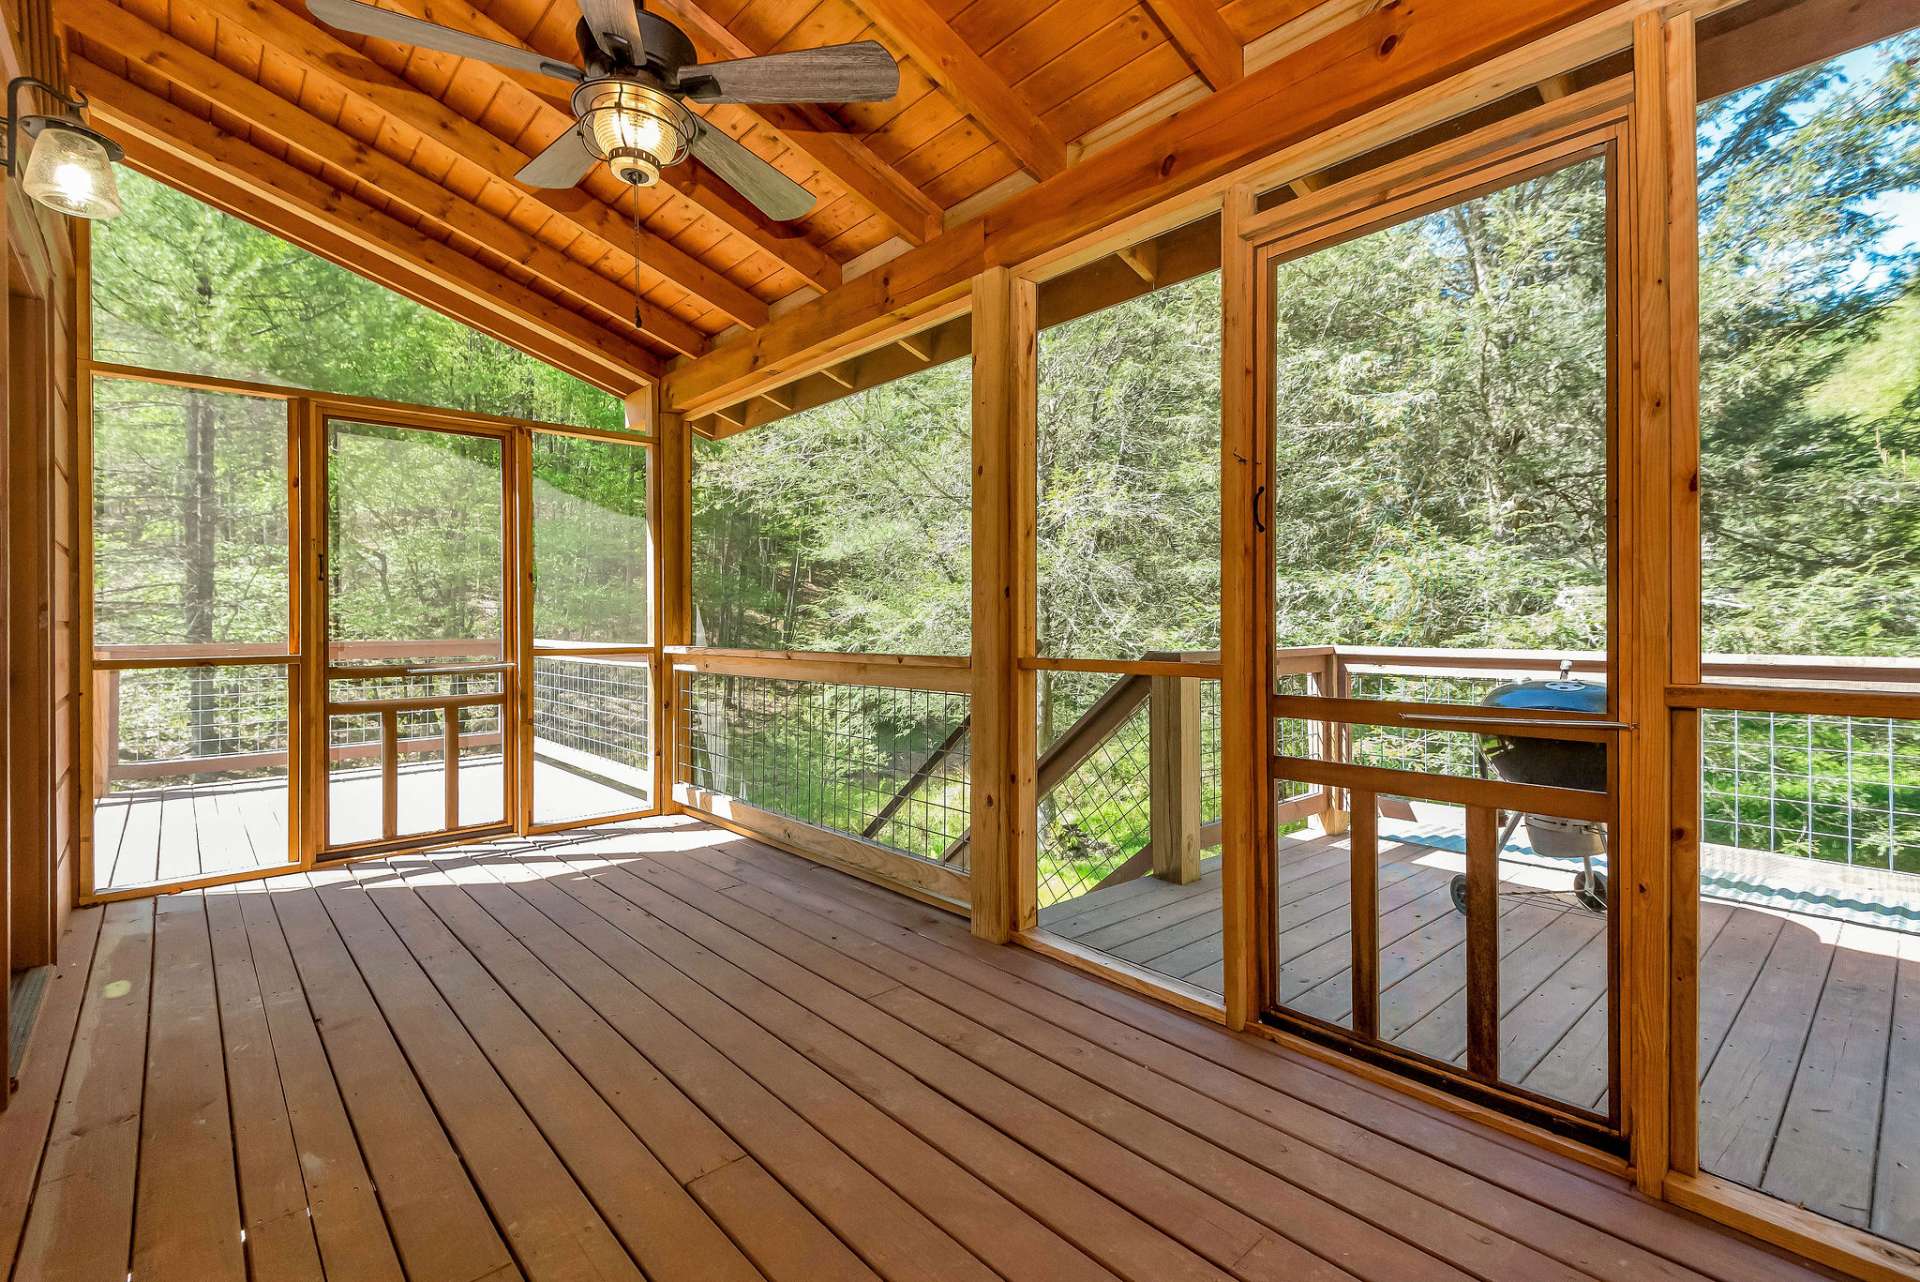 Stay cool and relax on the screened porch on the back.